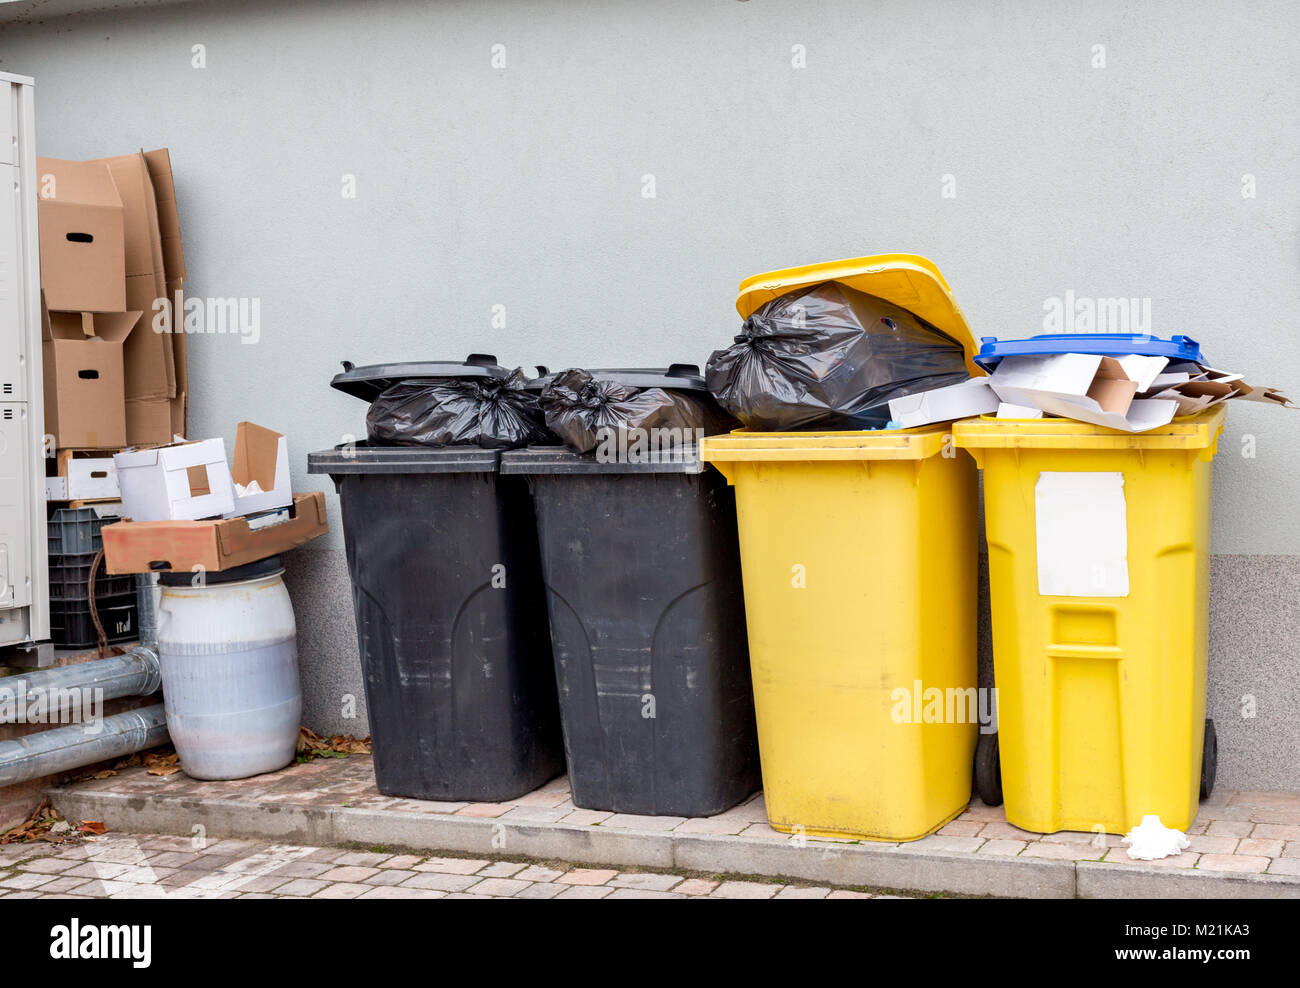 Overflowing plastic waste cans with black garbage bags, cardboard boxes and a container with a liquid Stock Photo